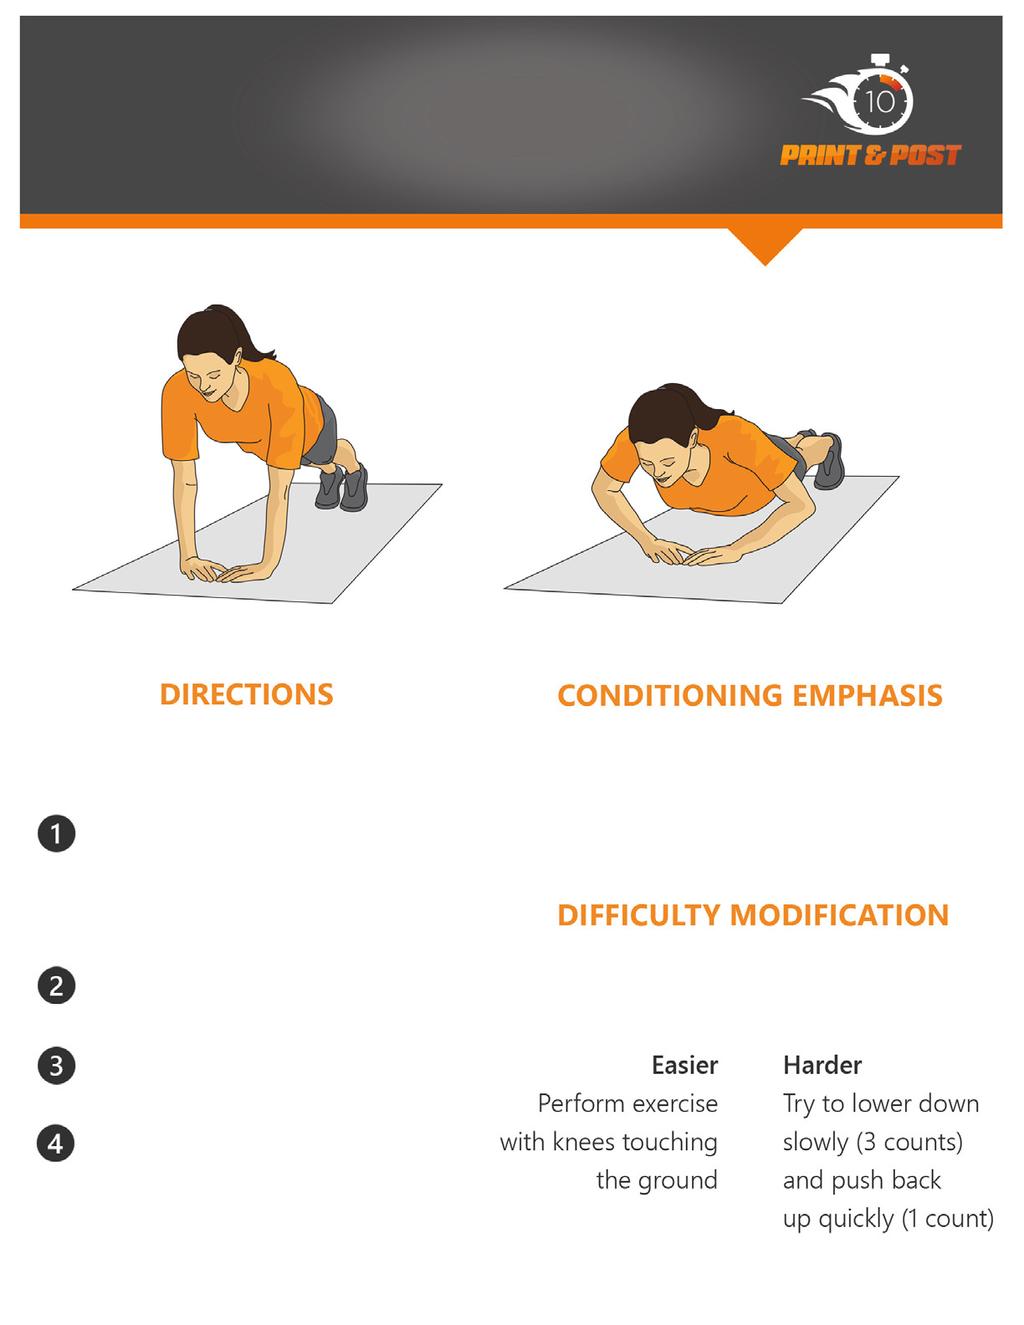 Diamond Push-up Begin a plank position with hands touching in diamond shape Lower halfway to